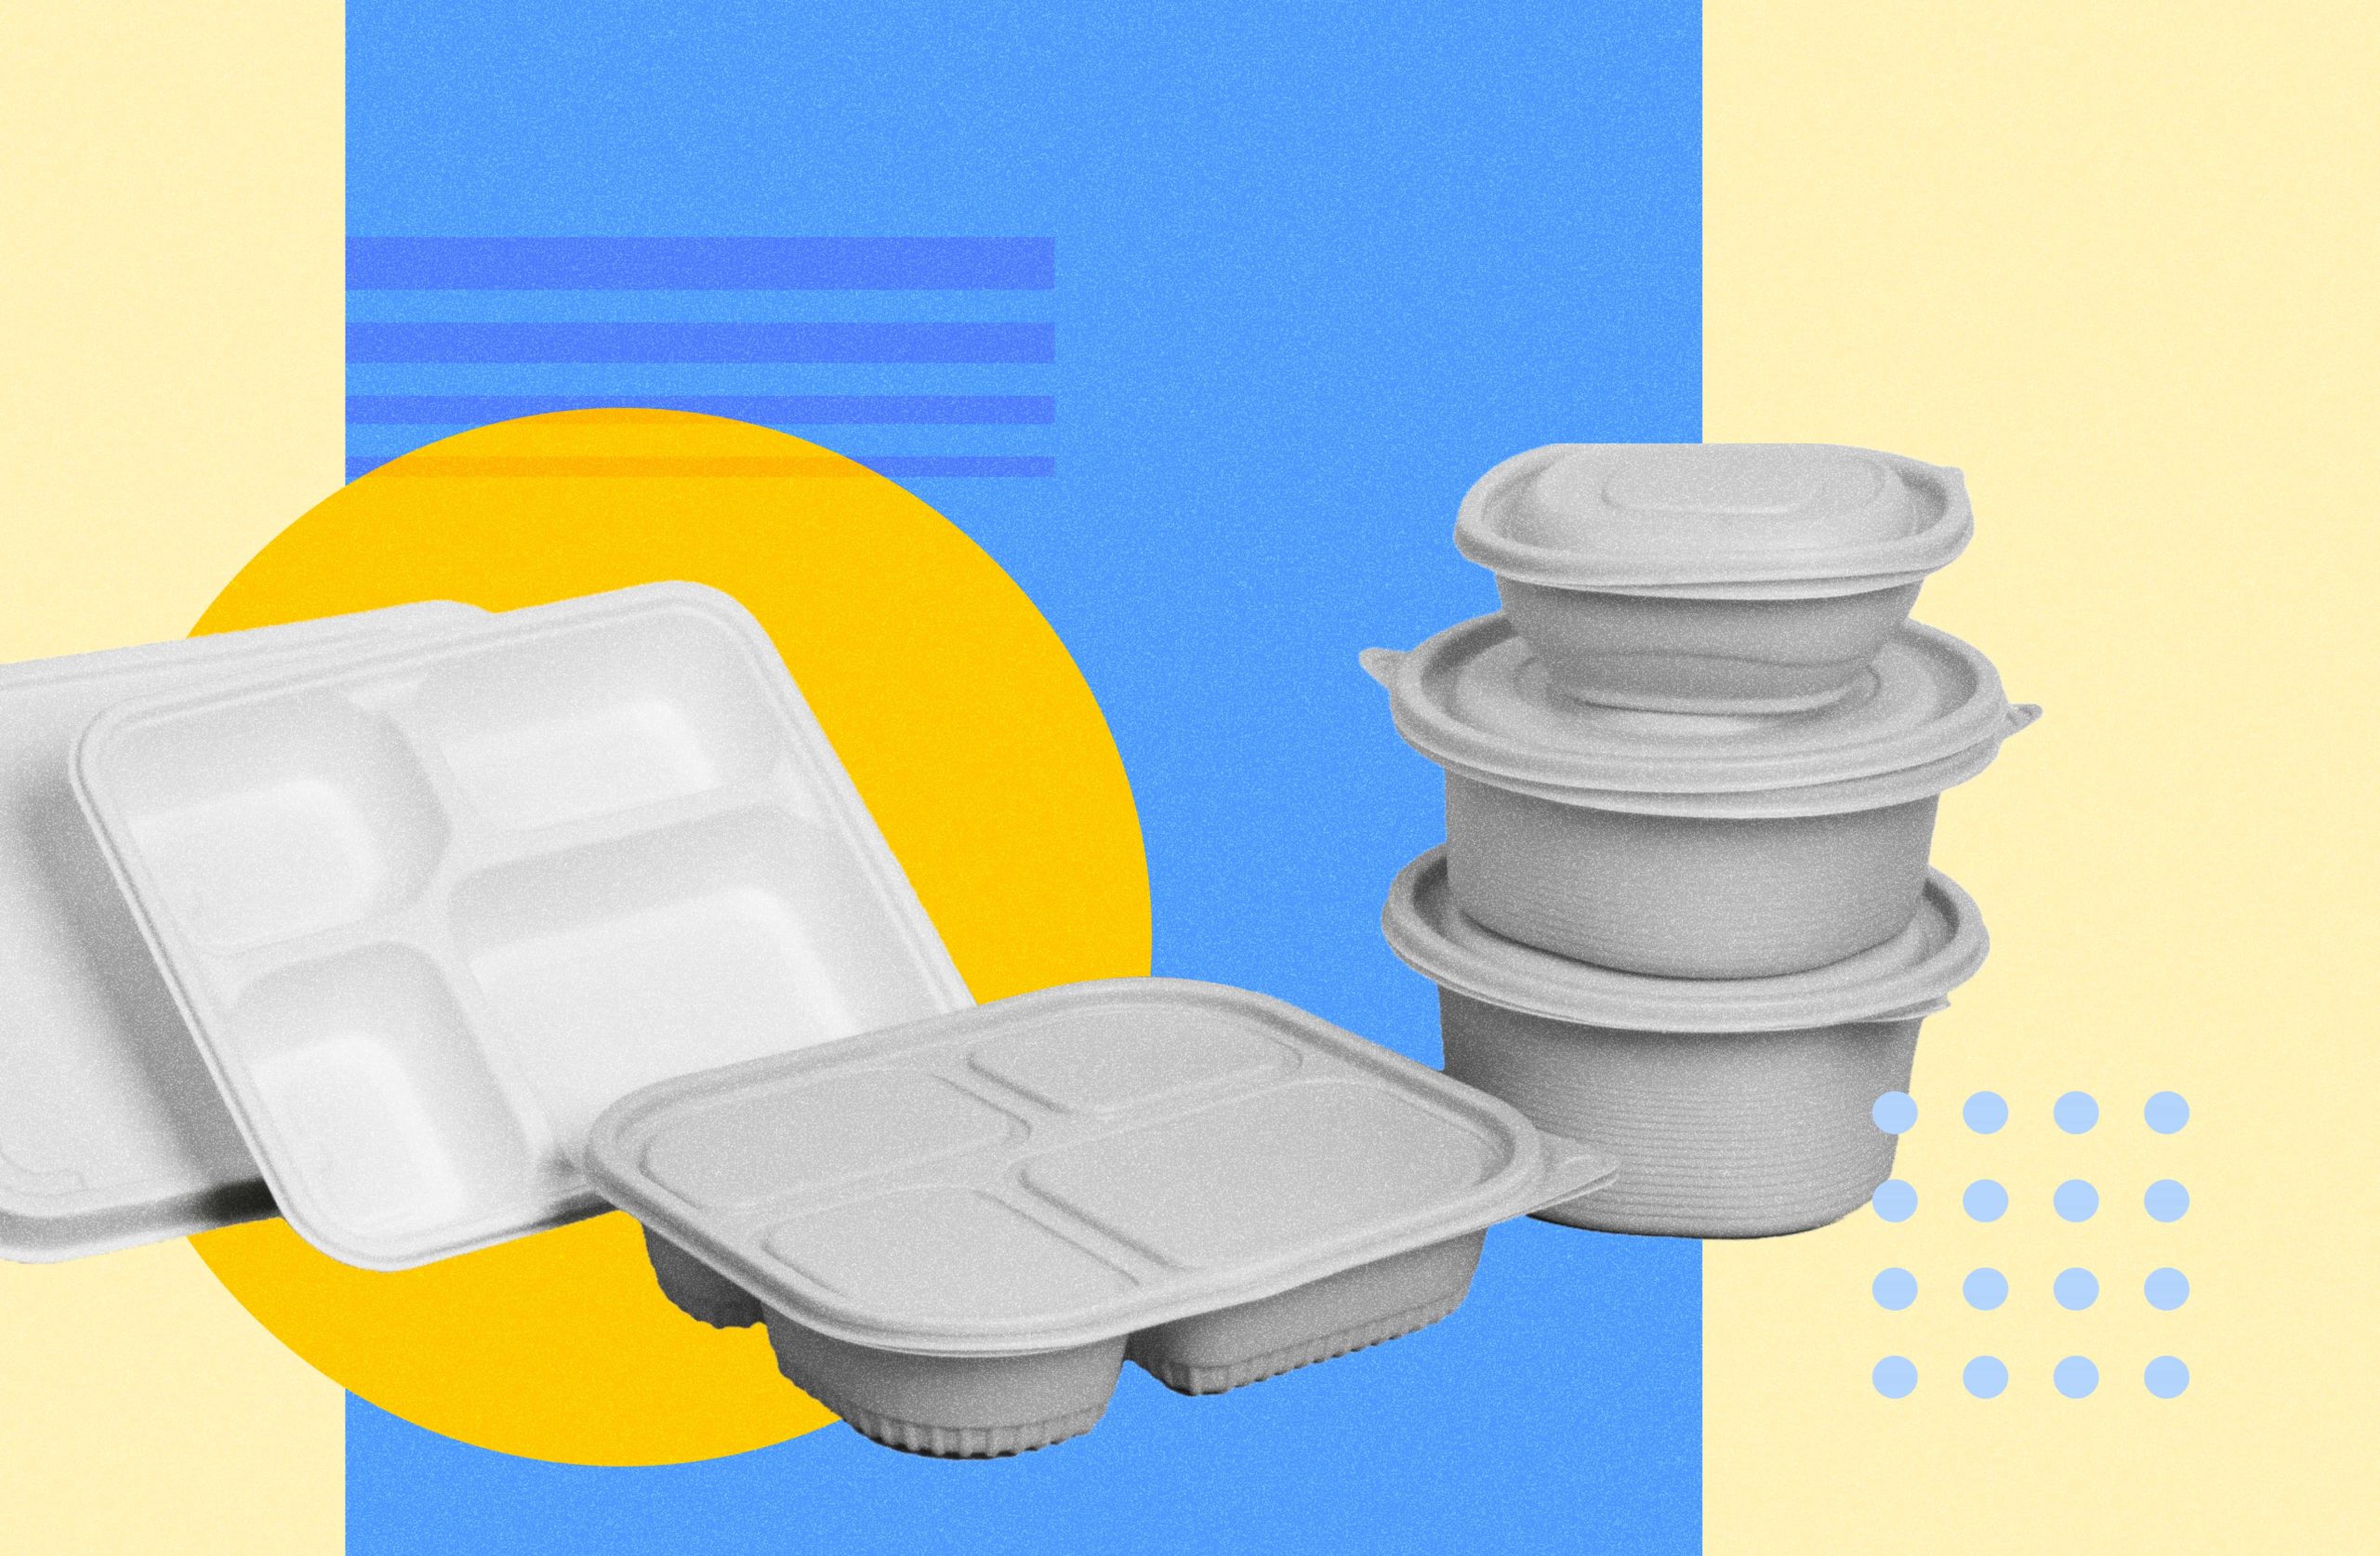 Single use plastic and Styrofoam food containers ready for take